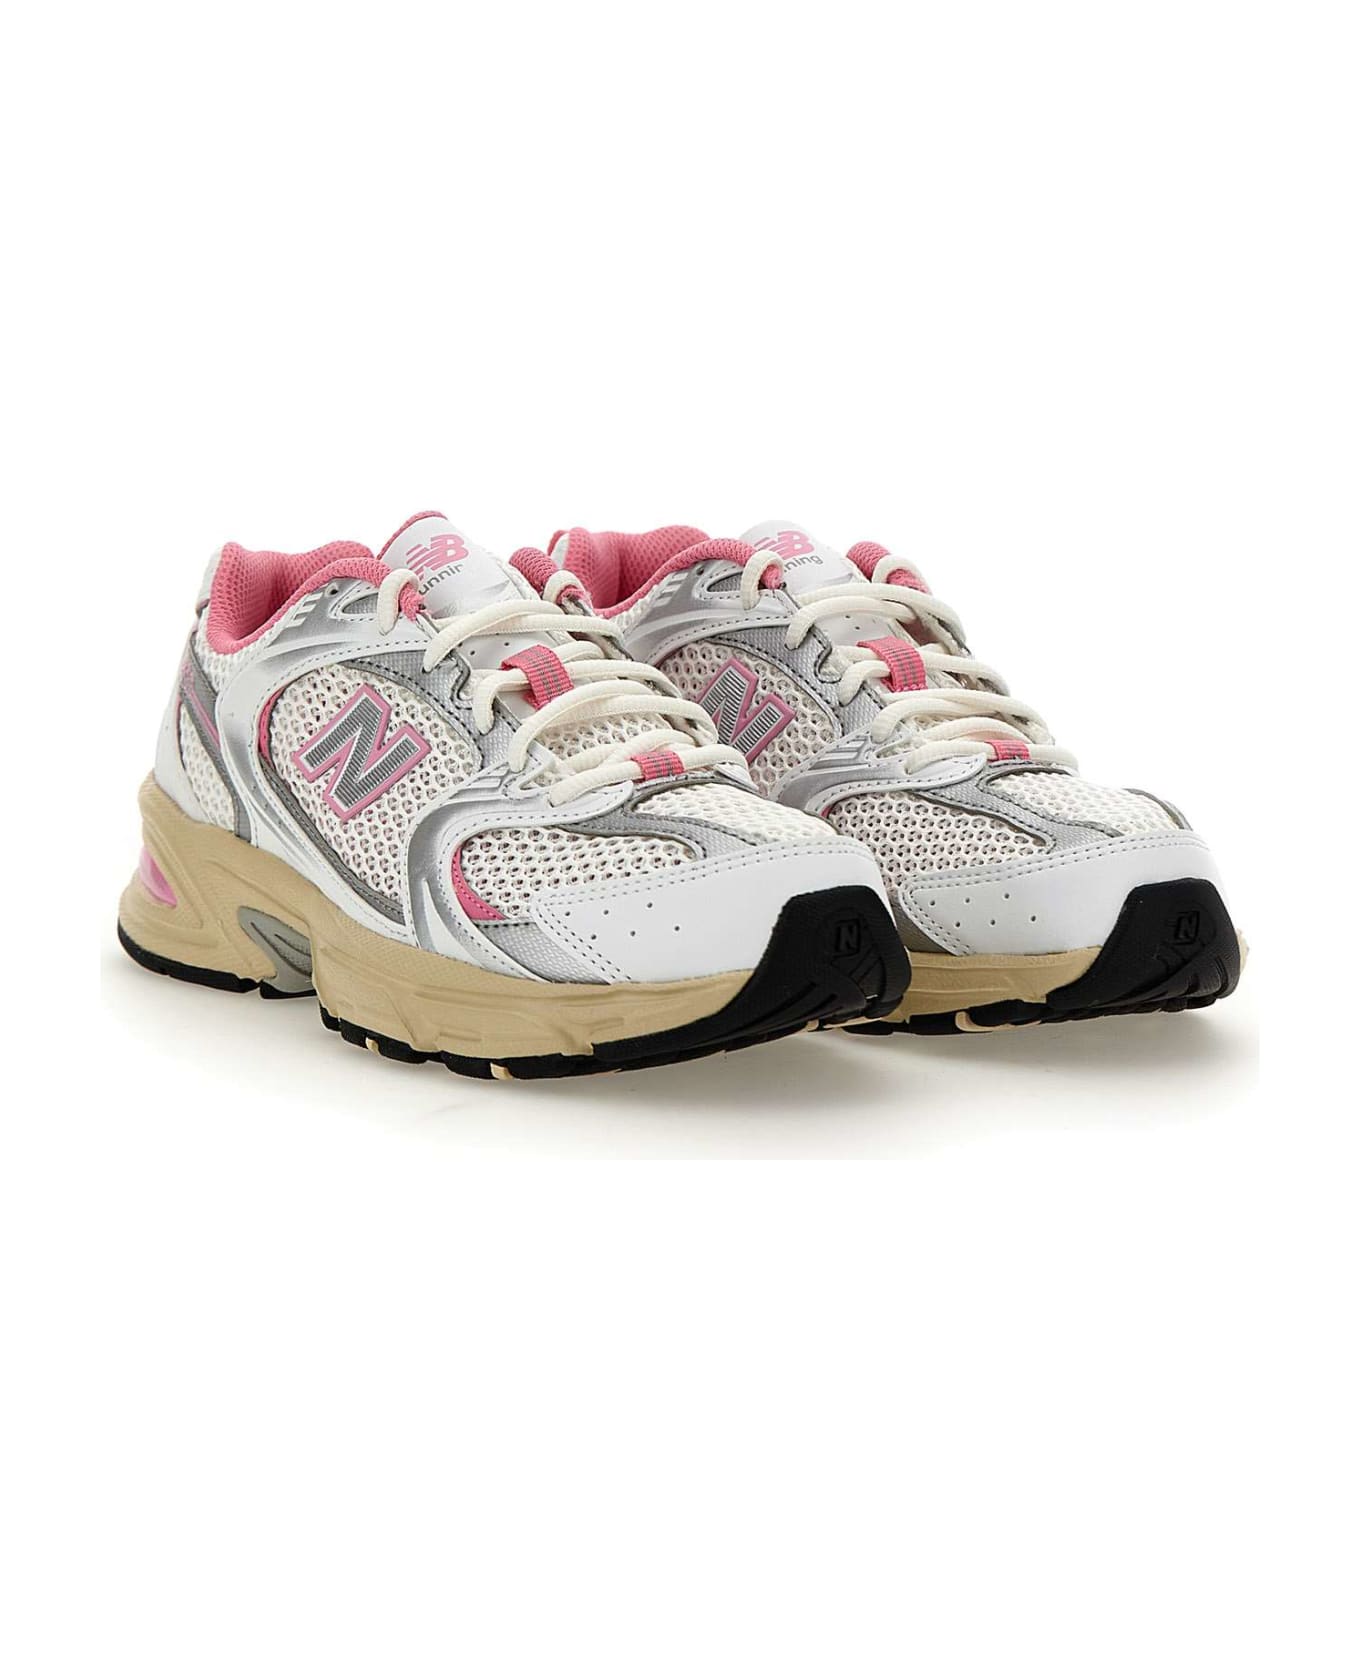 New Balance "mr530" Sneakers - WHITE-PINK